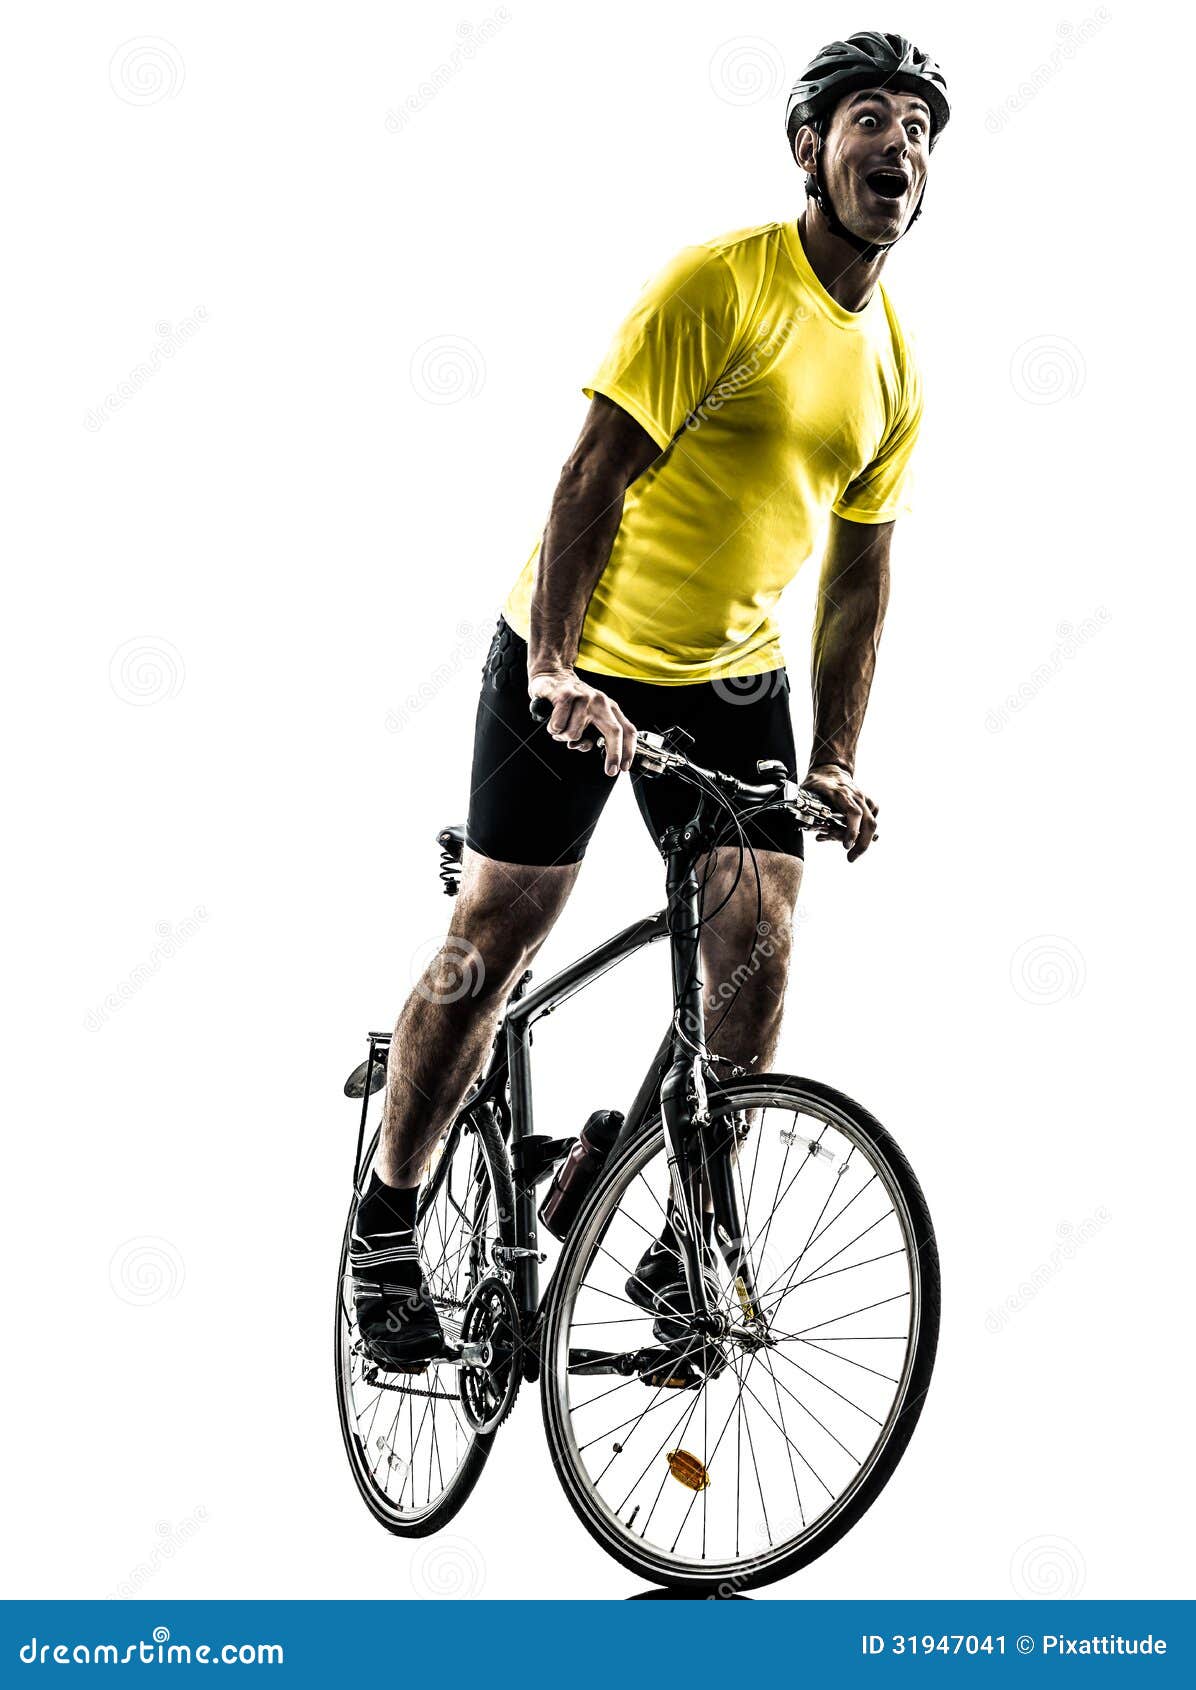 clipart man on bicycle - photo #43